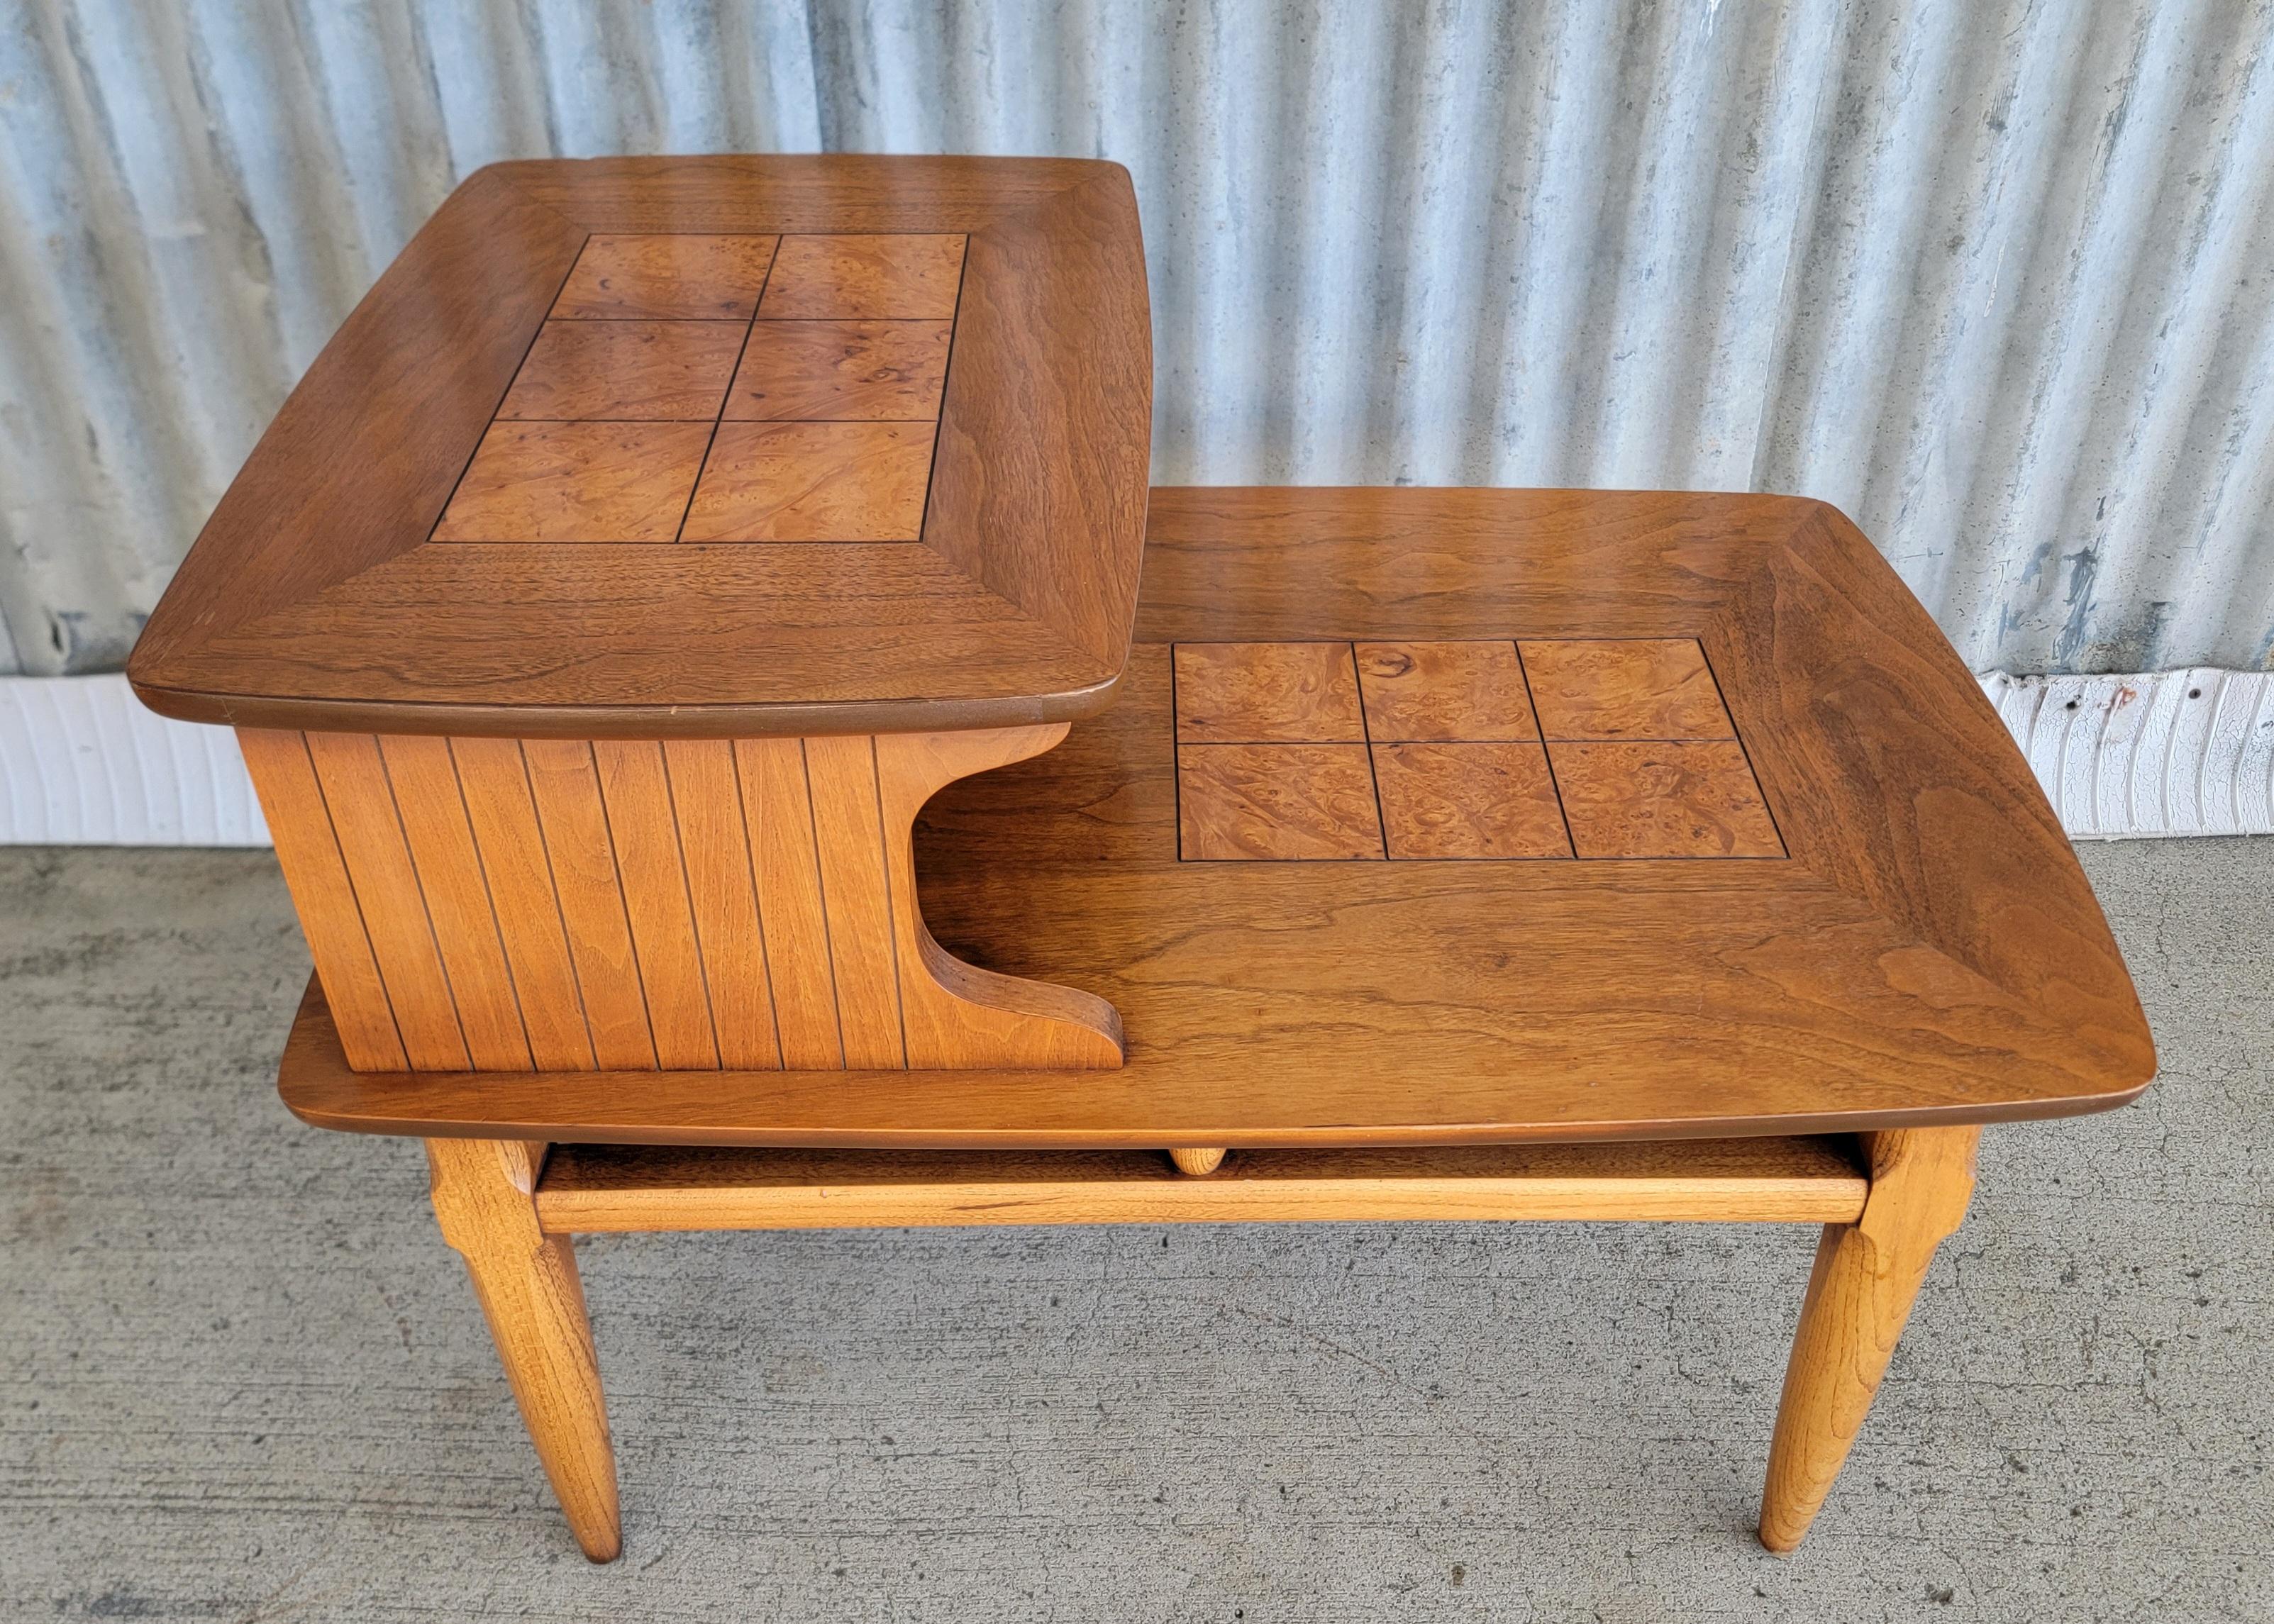 A Mid-Century Modern 2 tier or step end table by Lane Furniture. Circa. 1960. Tapered legs with a tile type burl-wood detail. Very good original condition with original finish. Lower table top measures 14.75 inches high. 